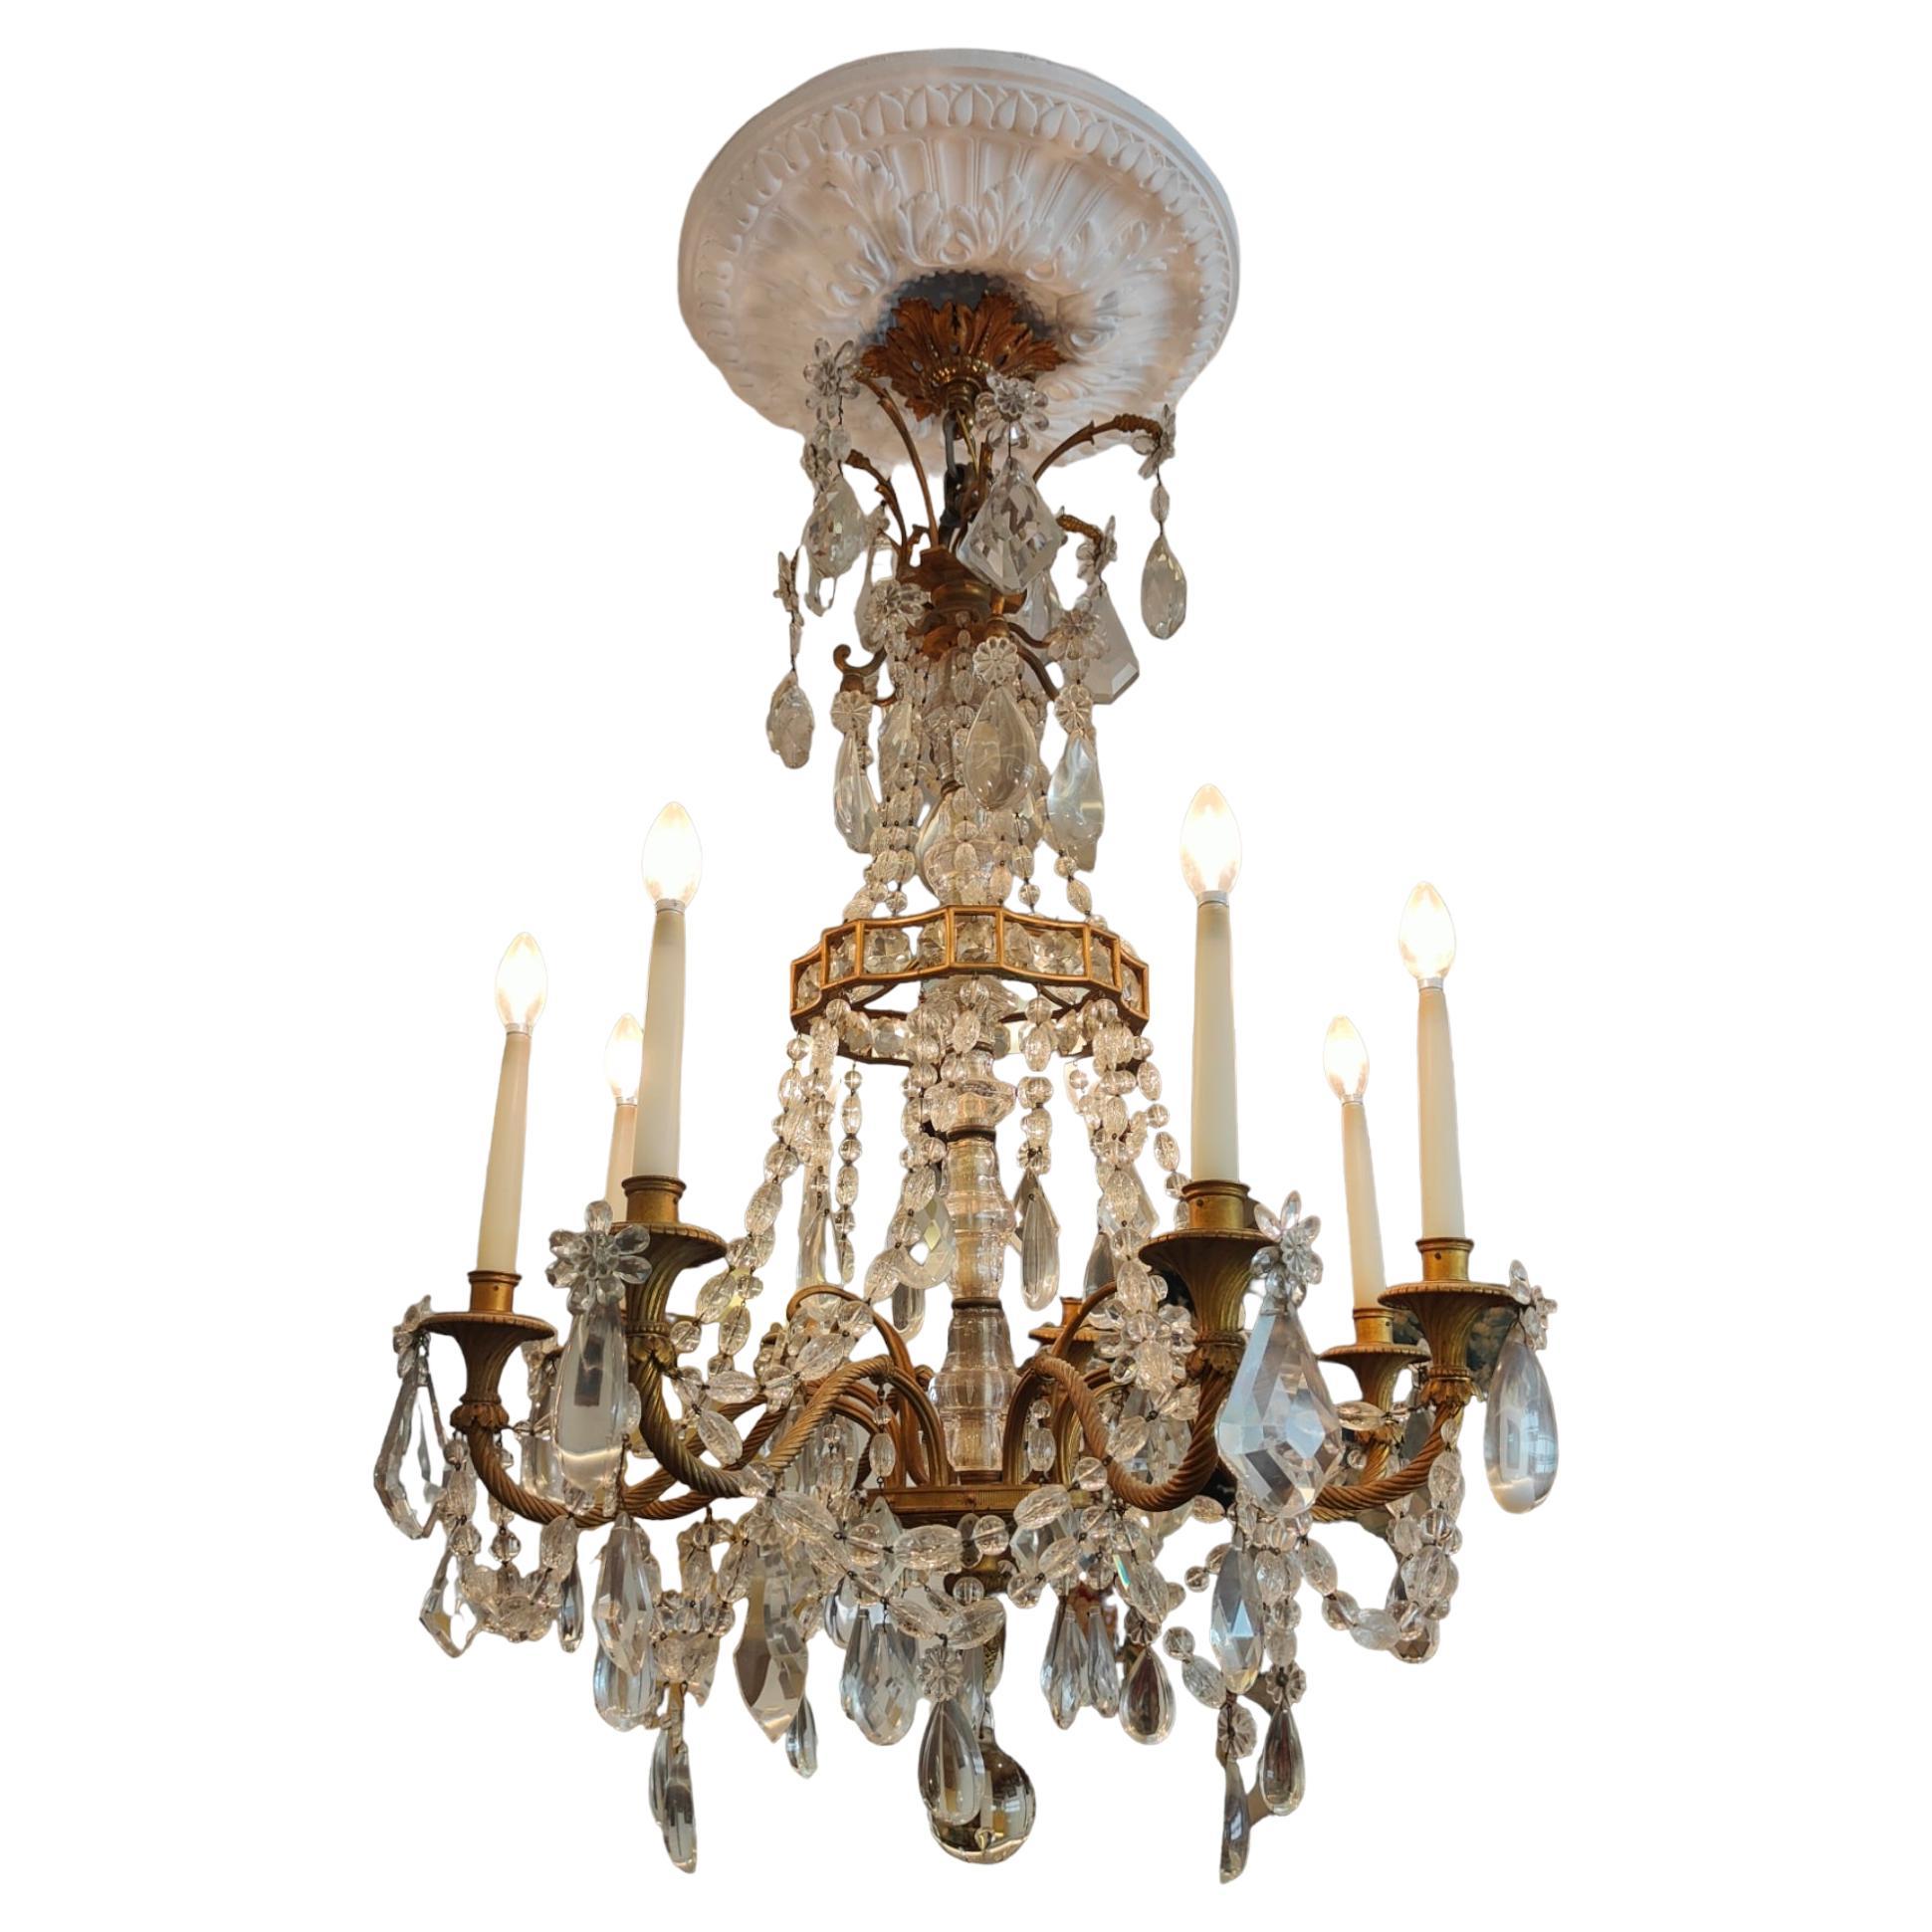 Large French Chandelier in Gilt Bronze and Faceted Glass from the XIX